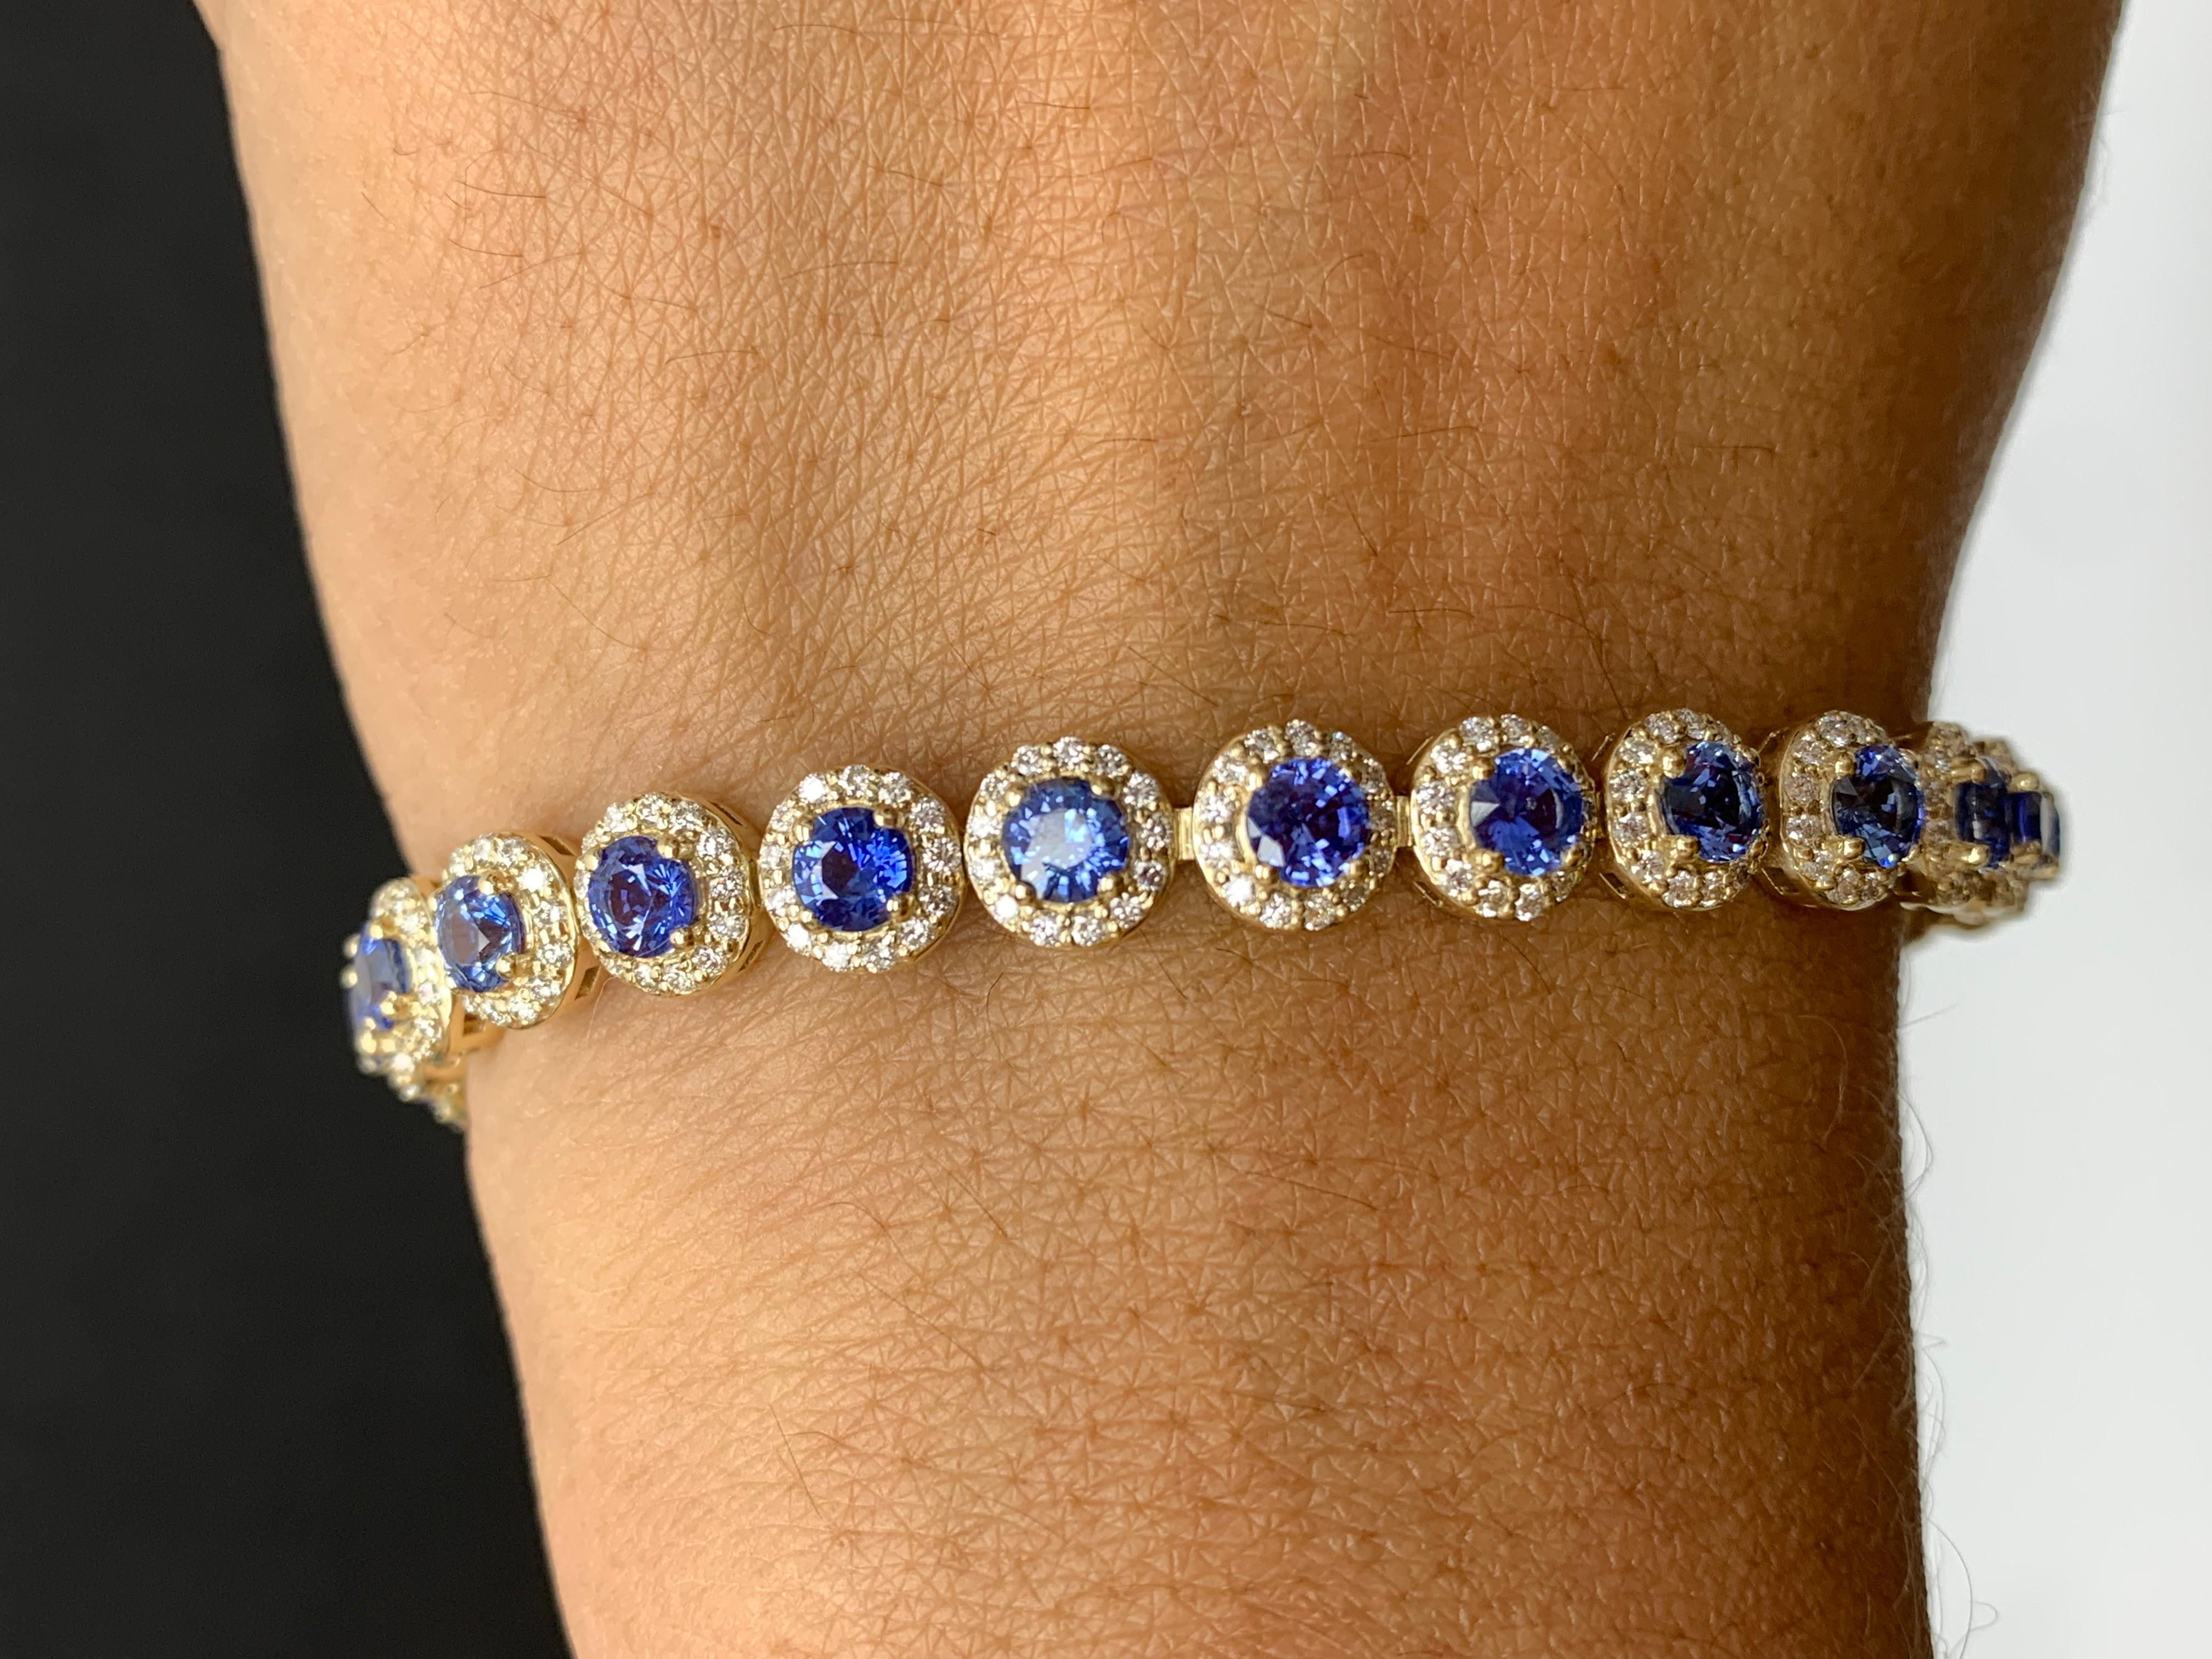 Contemporary 7.47 Carat Blue Sapphire and Diamond Halo Tennis Bracelet in 14k Yellow Gold For Sale